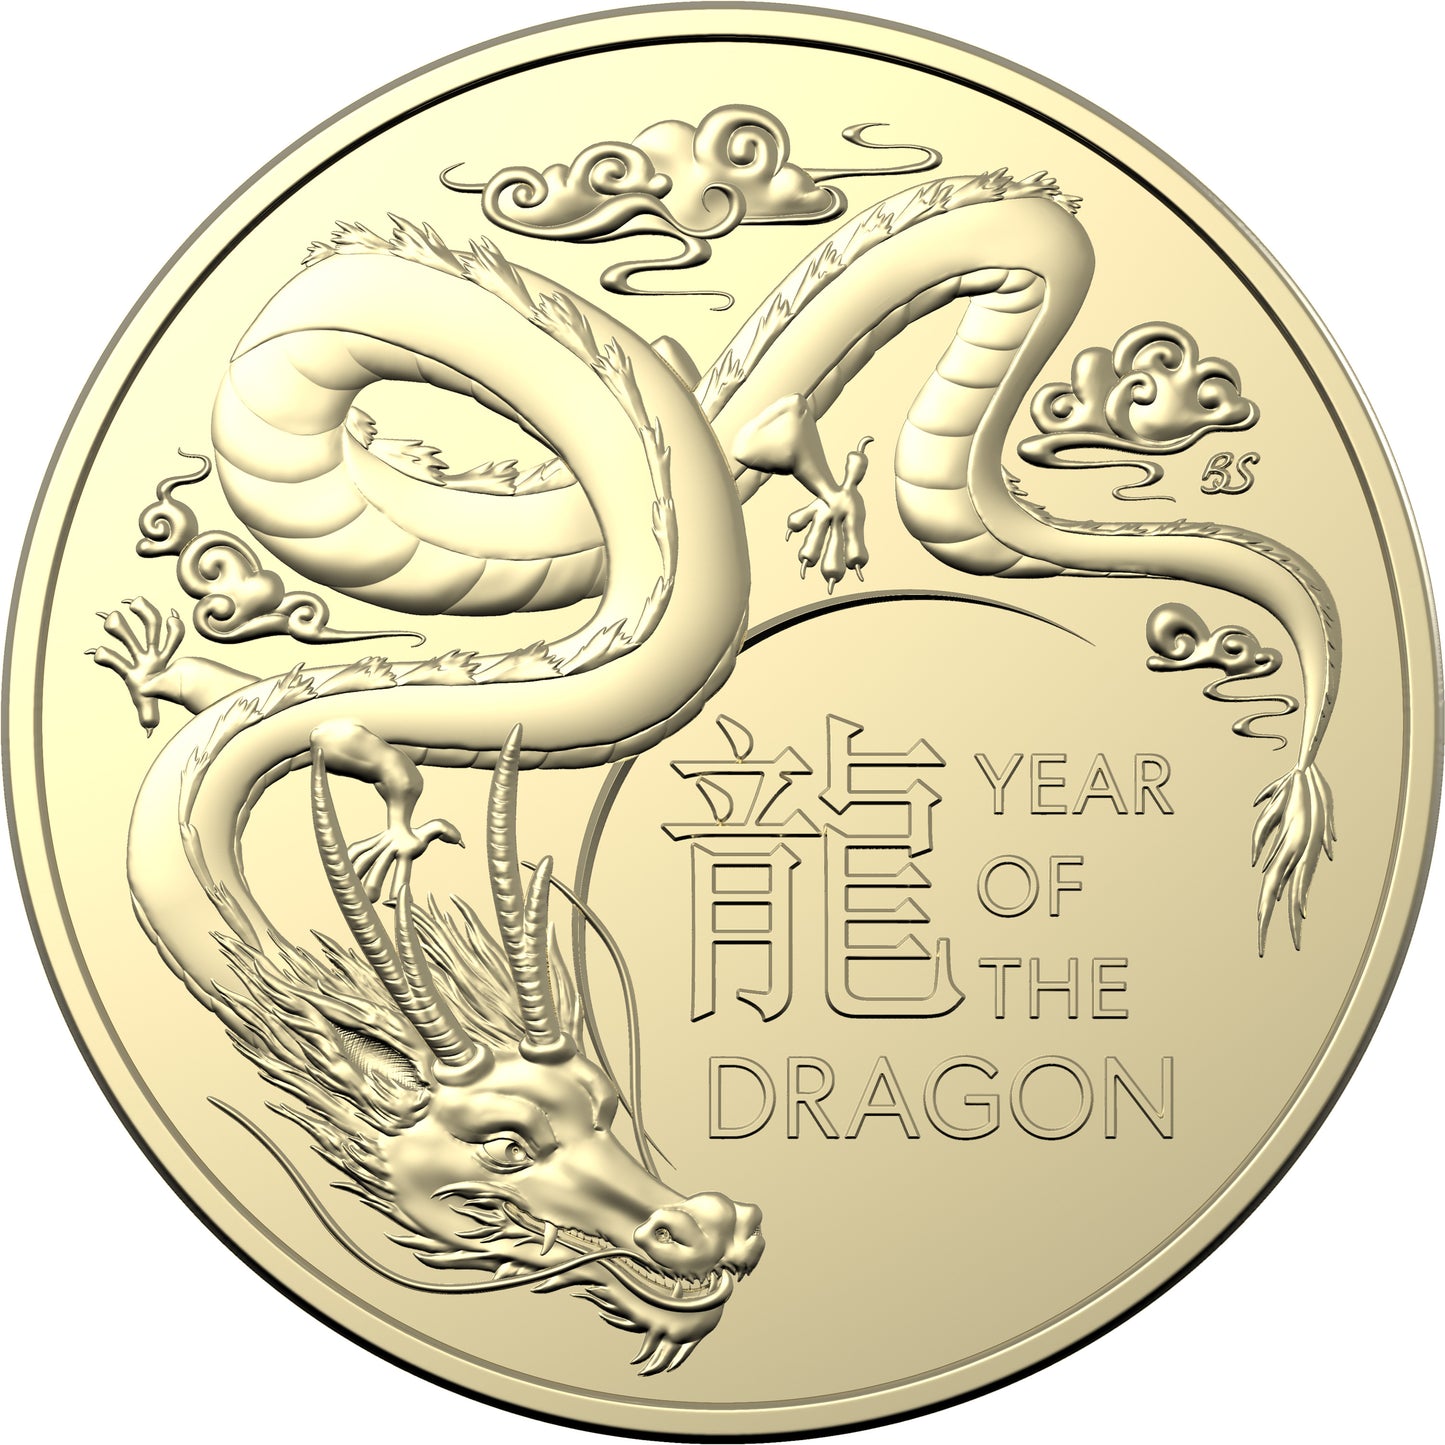 Lunar Year of the Dragon 2024 $1 AlBr Uncirculated 2 Coin Set